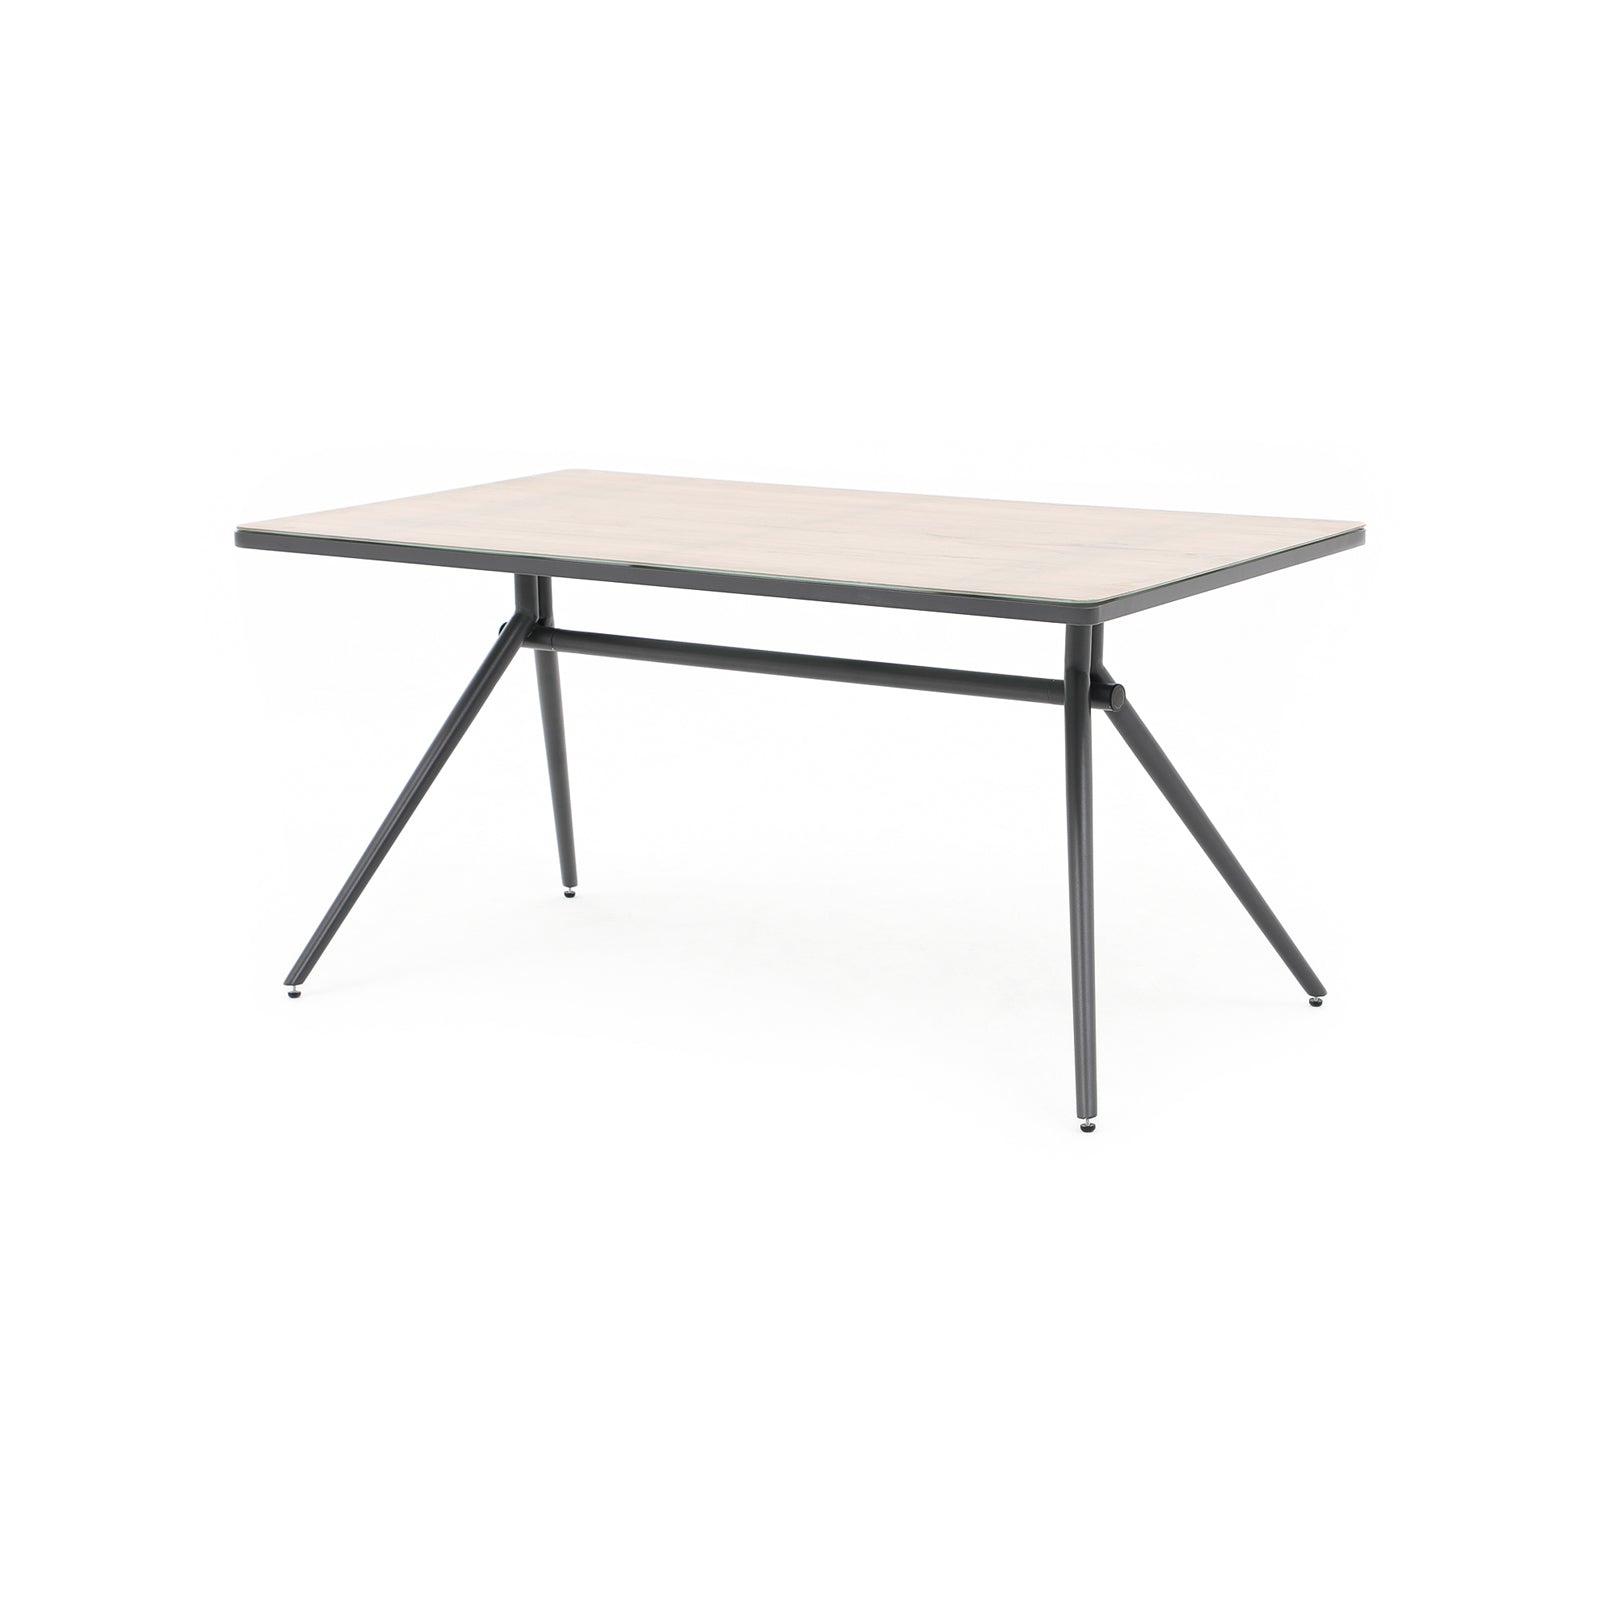 Hallerbos rectangle outdoor Dining Table with steel frame, resin ceramic glass top, side view - Jardina Furniture